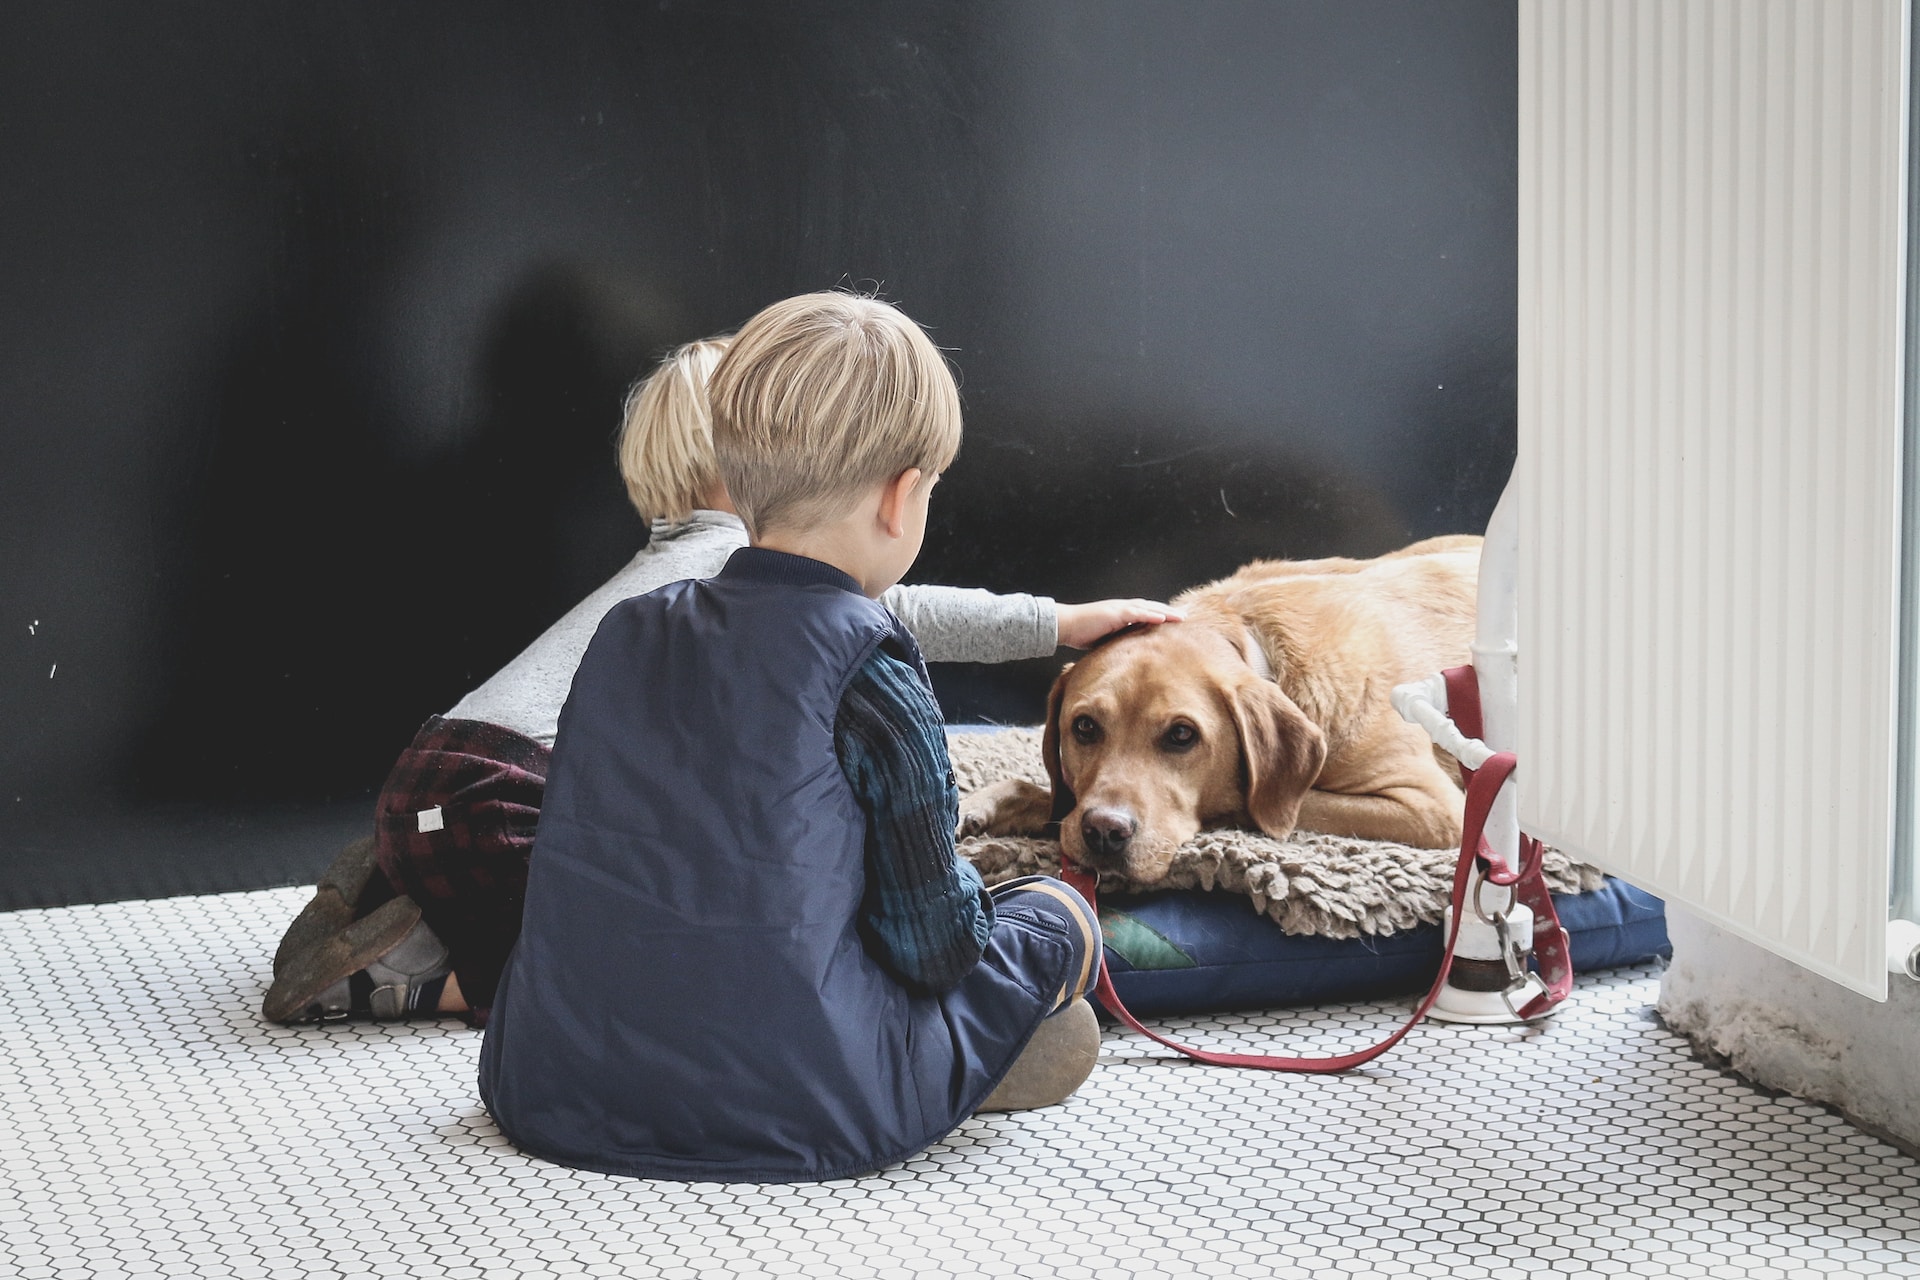 Service Dogs increase socializing skills of Autistic Children